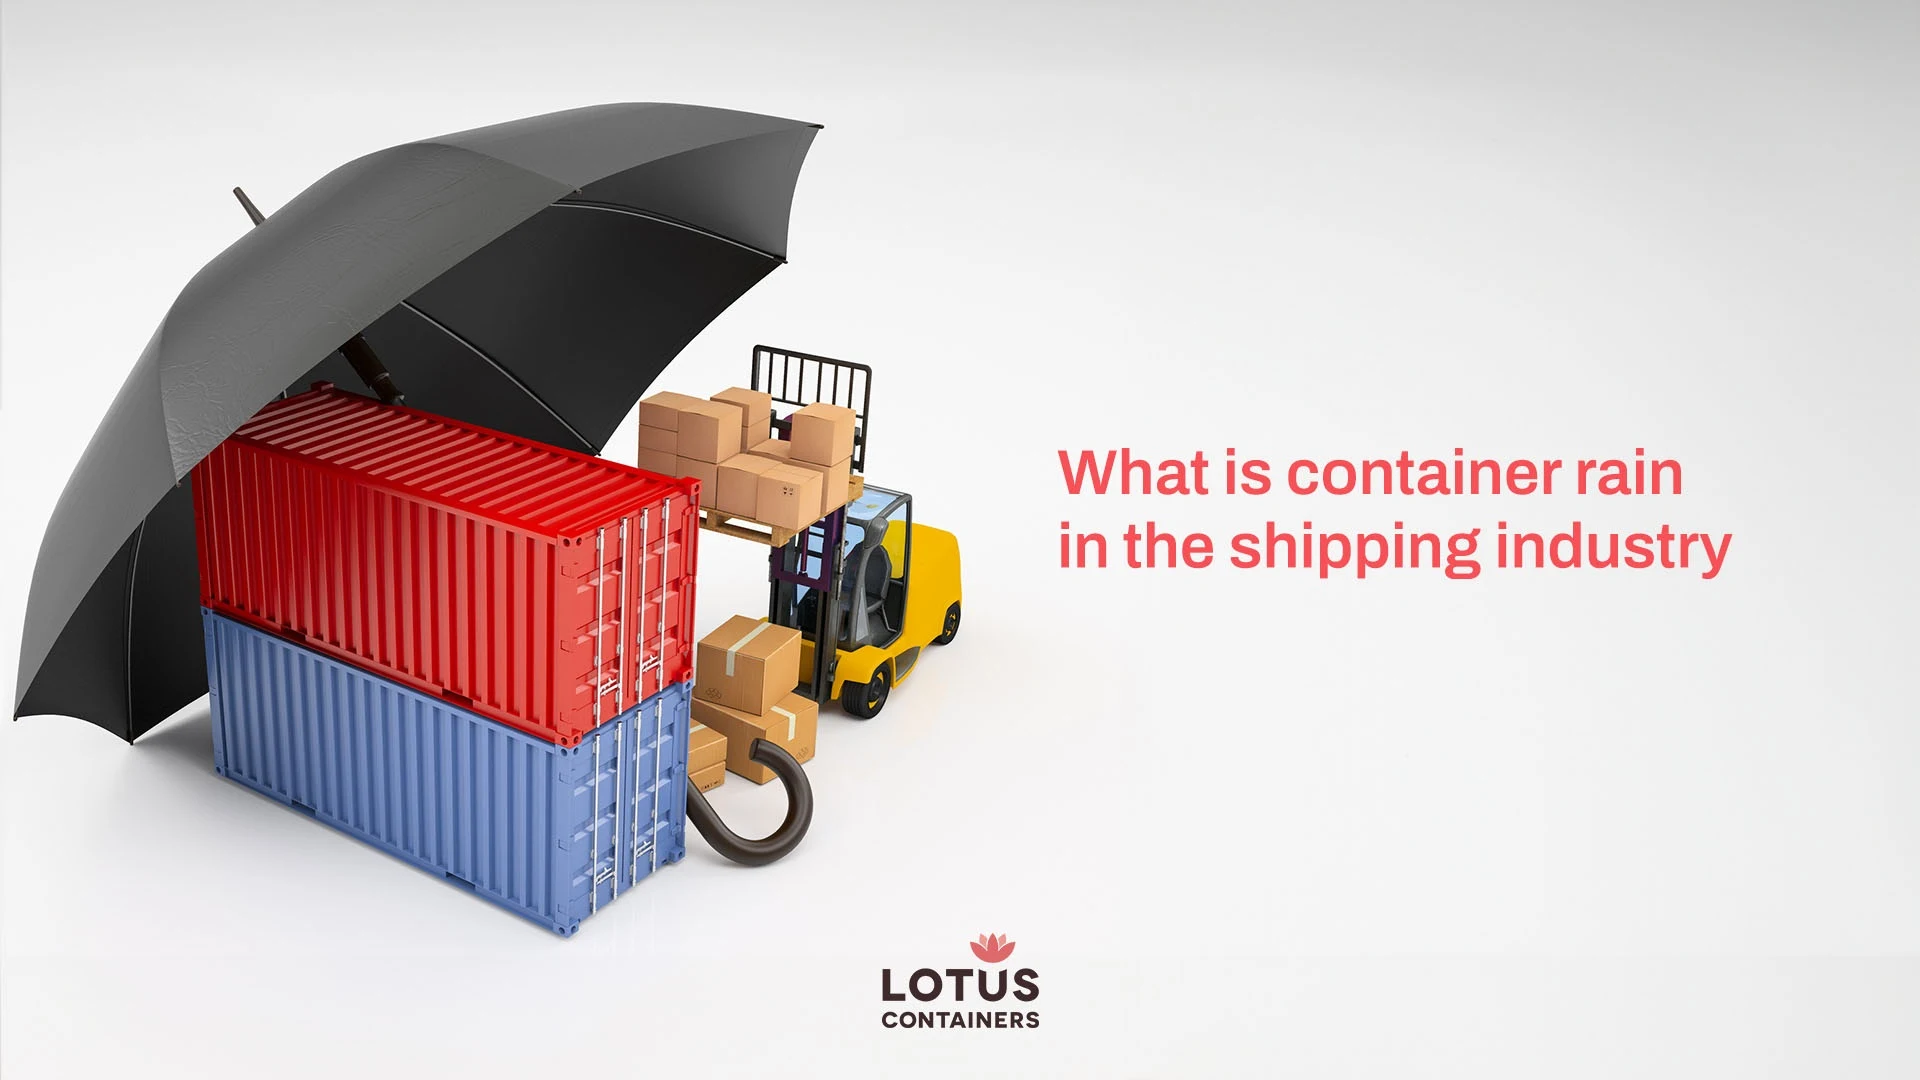 Container rain in the shipping industry